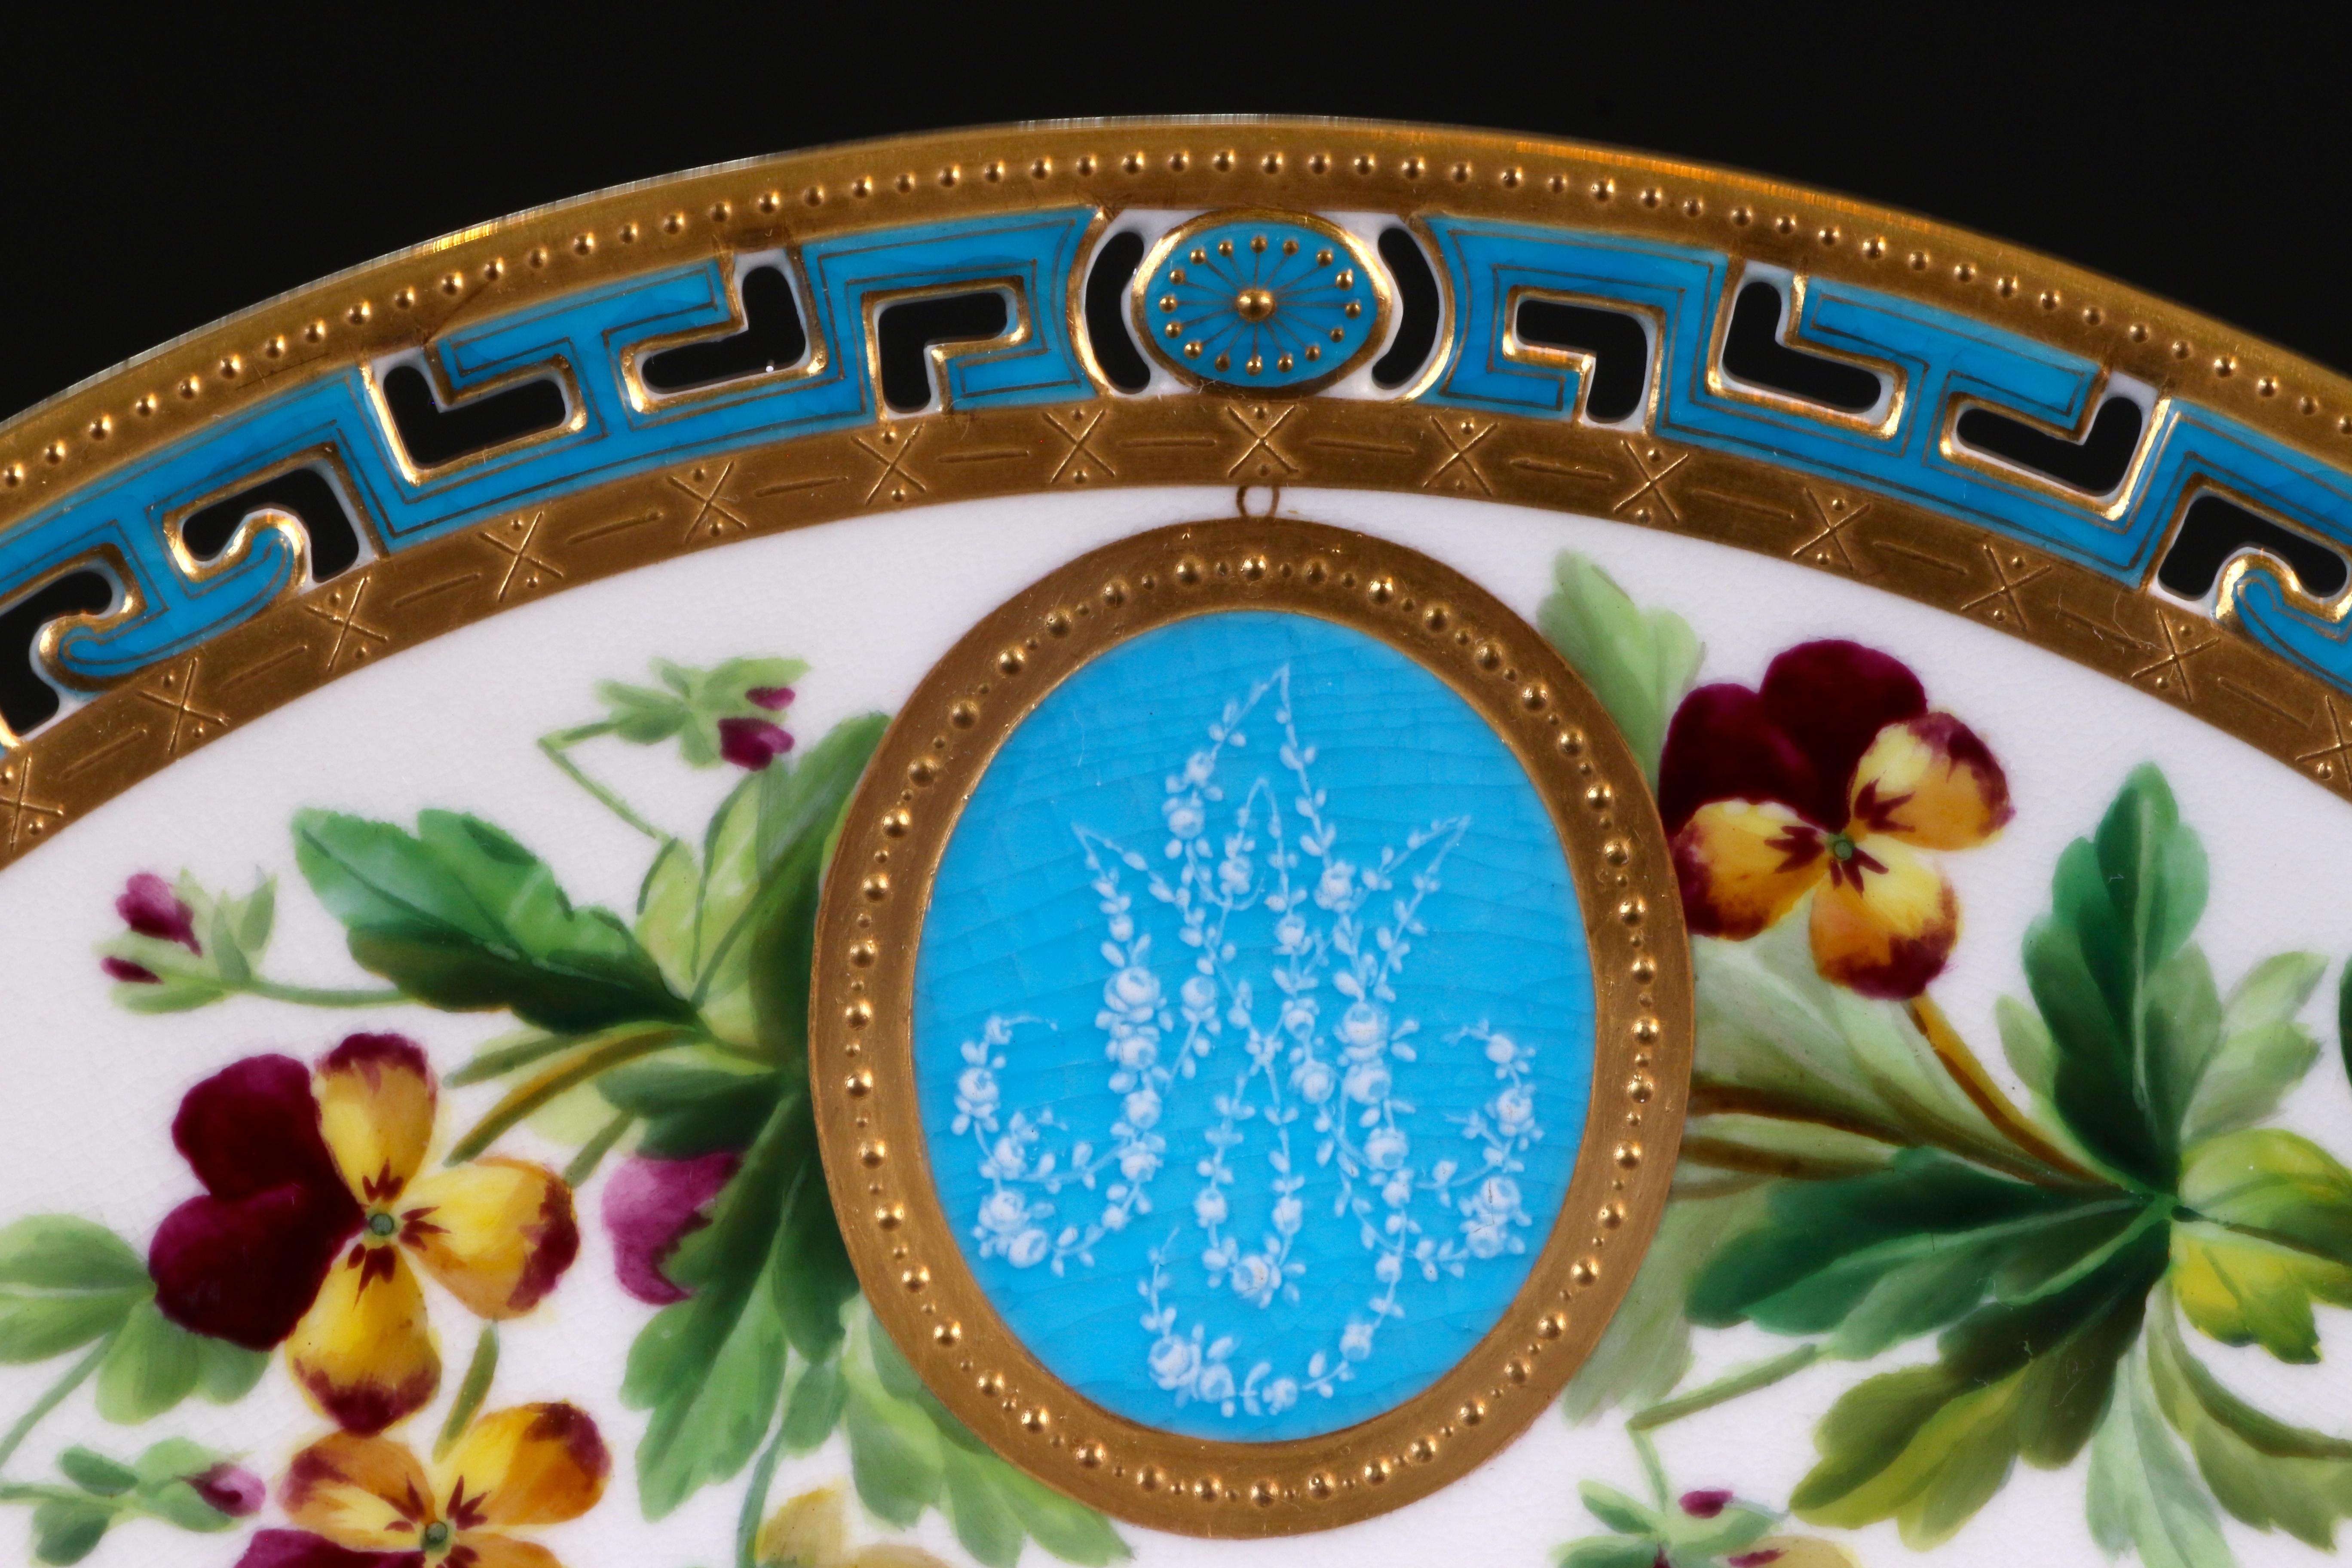 Here are 11 custom, monogrammed, hand painted pate-sur-pate cabinet or dinner plates from Minton, Stoke-on-Trent, England. The top of each plate is decorated with a unique spray of hand-painted flowers that surrounds a bleu celeste 